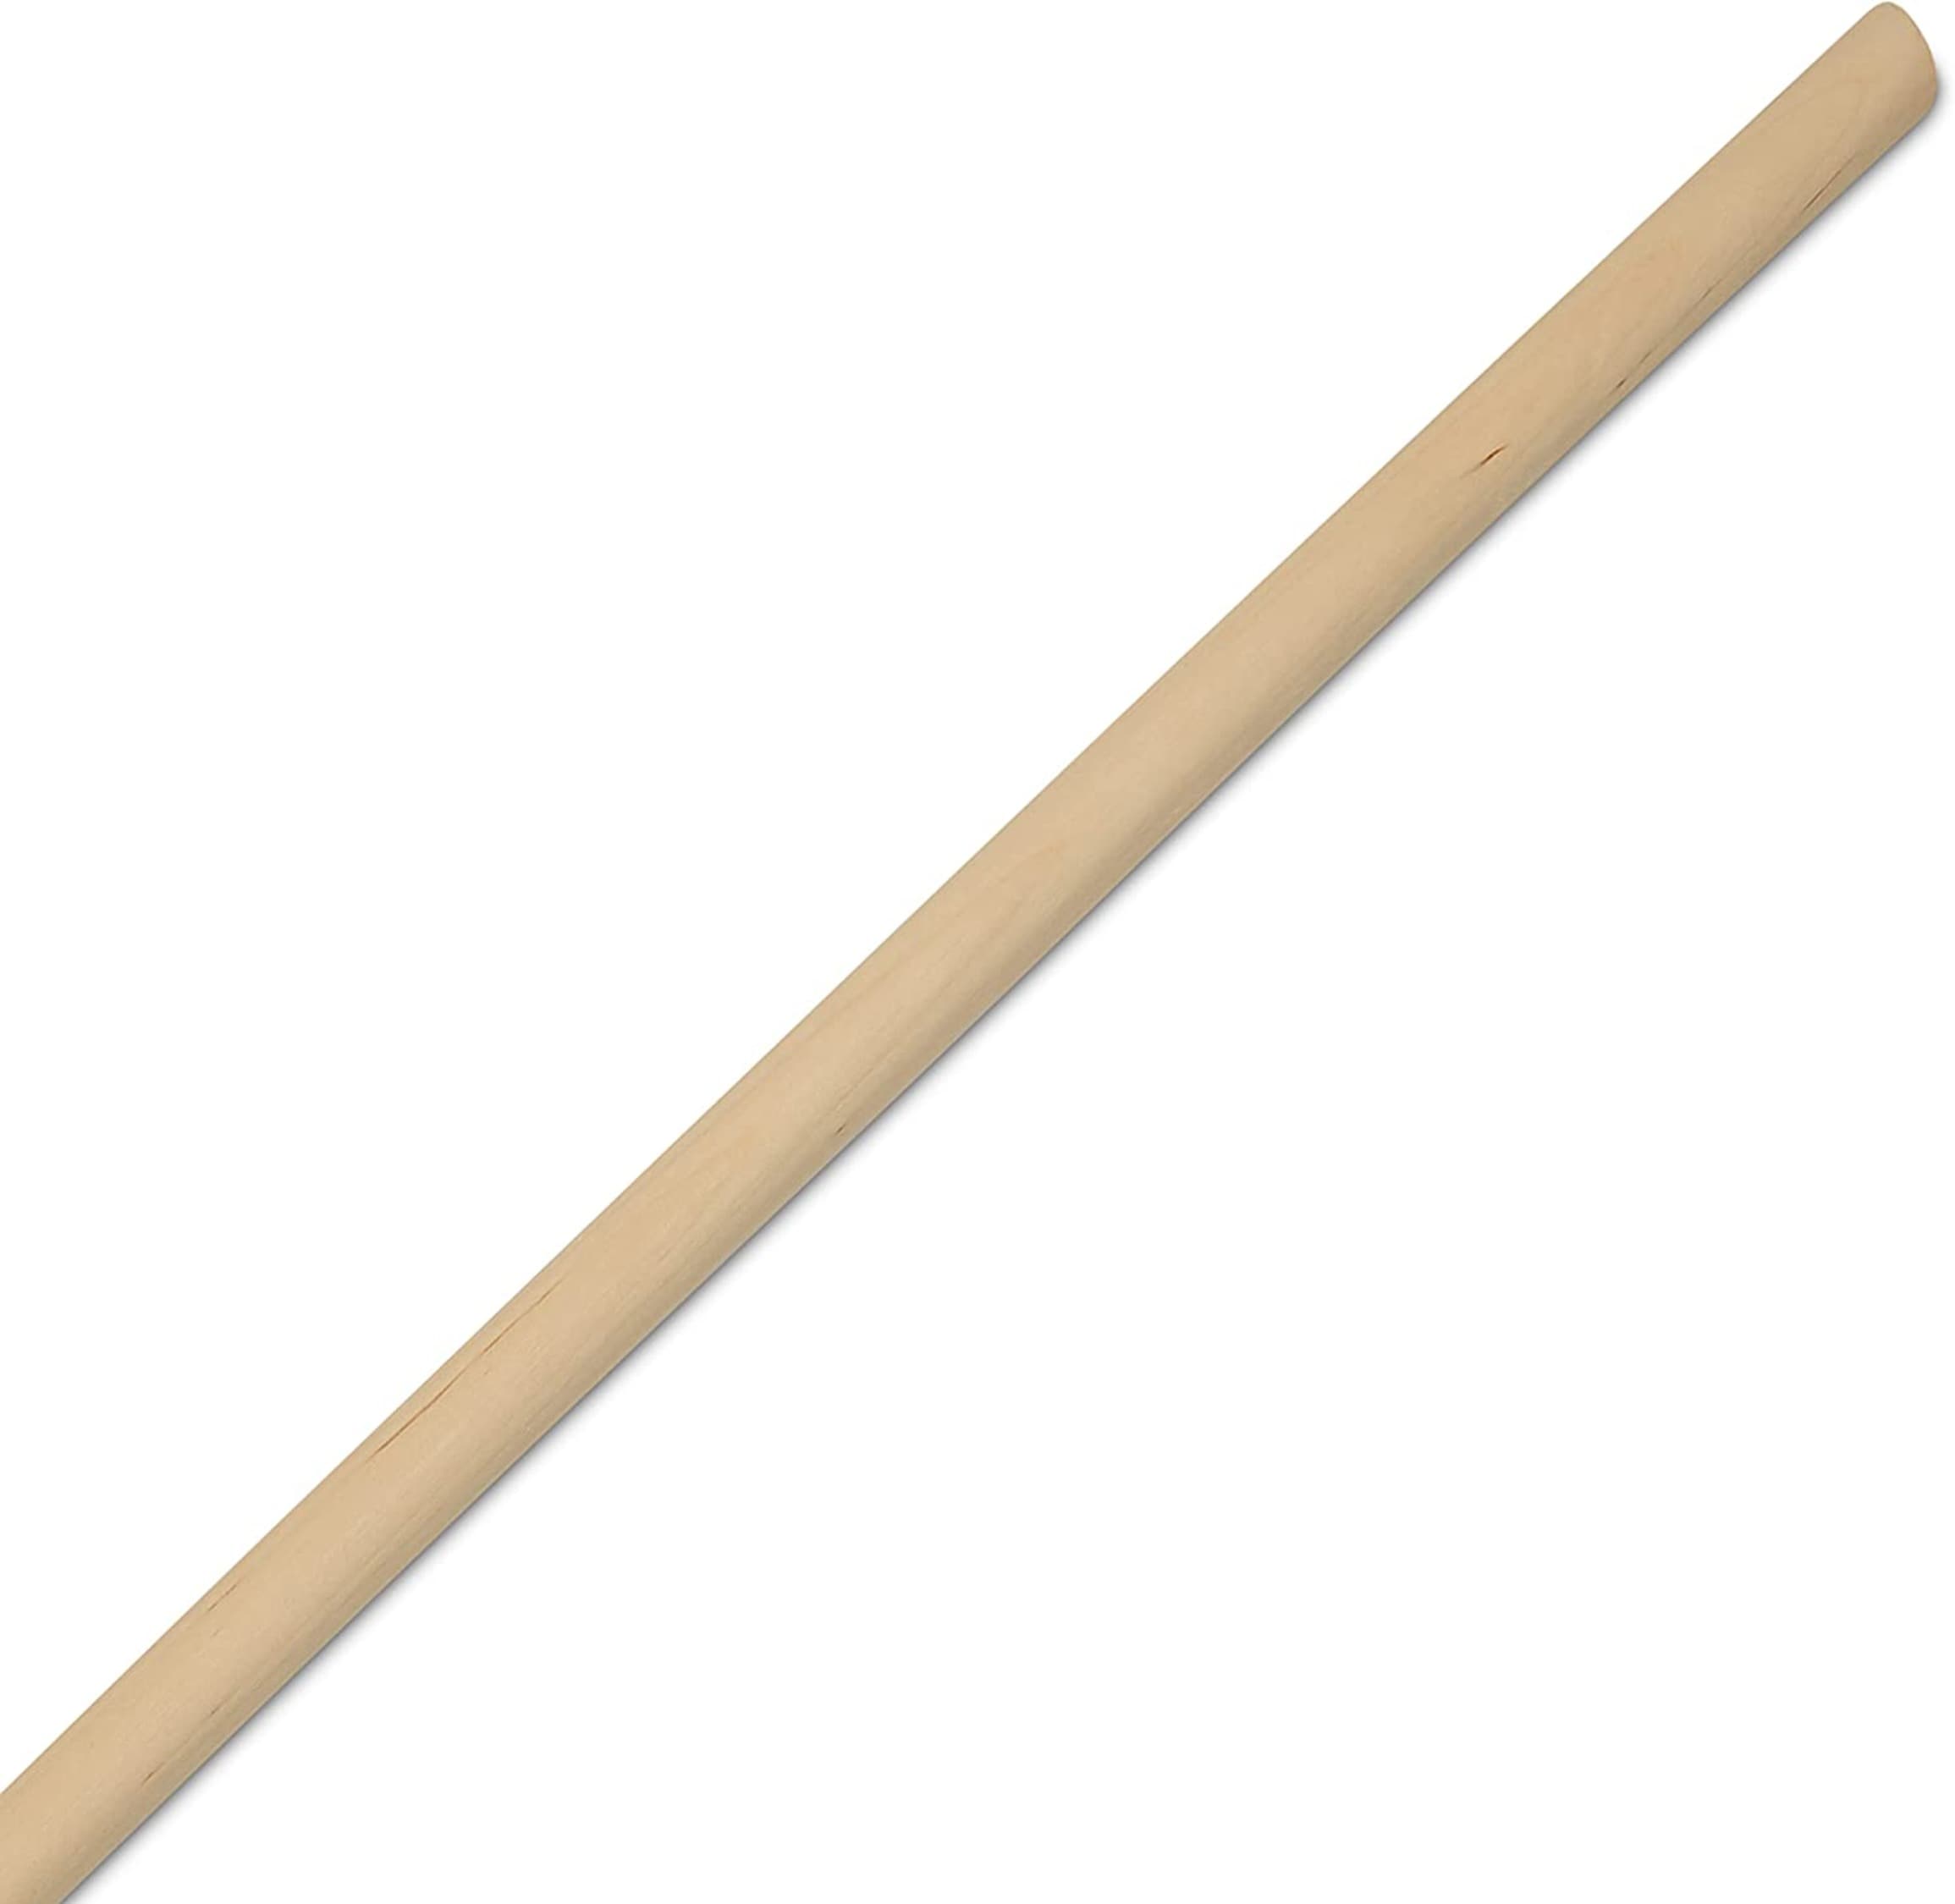 Woodpeckers Crafts Dowel Rods Wood Sticks- 5/8 X 72 In.- 2-Pieces